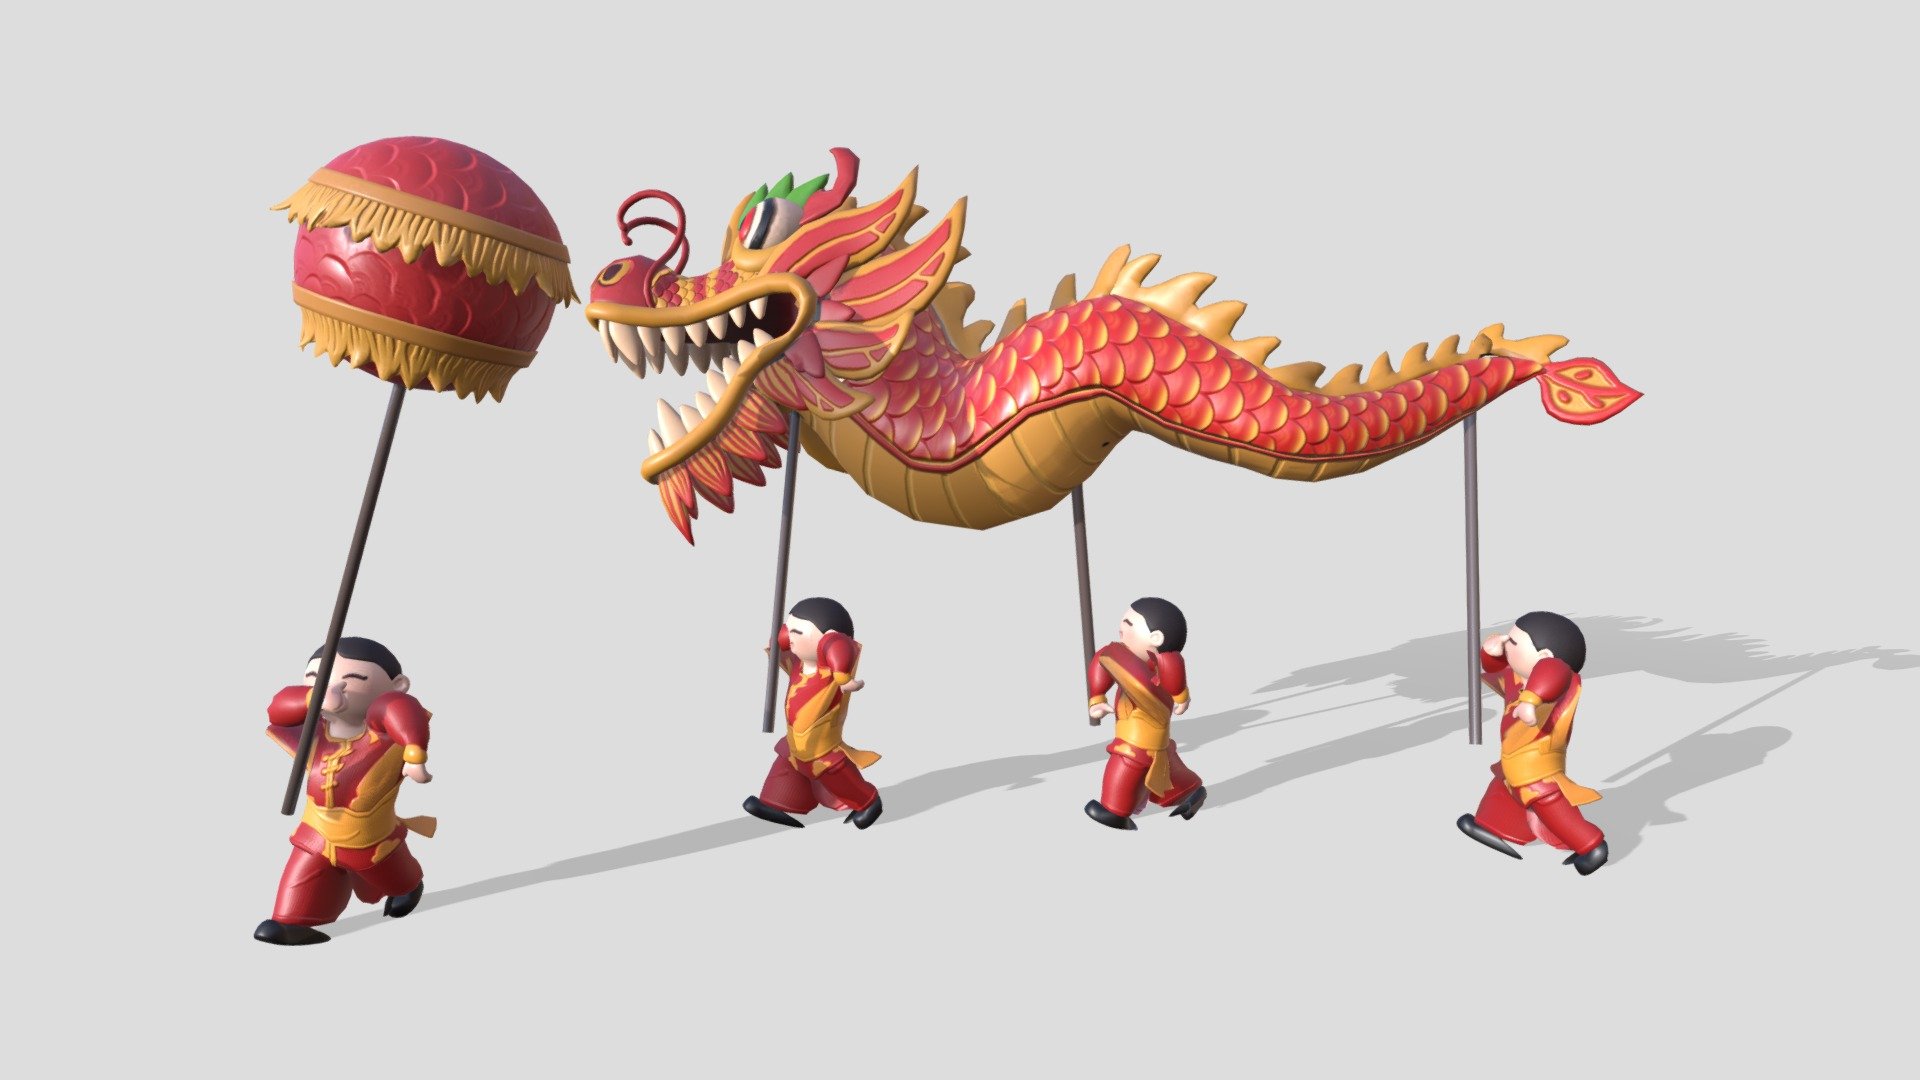 Stylised Chinese dragon dance, including dancers and leading ball. Animations included: Dancing (Loop)

Login to STB’s Tourism Information &amp; Services Hub for free downloads:
https://tih.stb.gov.sg/content/tih/en/marketing-and-media-assets/digital-images-andvideoslisting/digital-images-and-videos-detail.1047f6bf67a5ec741fea030f1fd8a54b64f.Dragon+Dance.html - Dragon Dance - 3D model by STB-TC 3d model